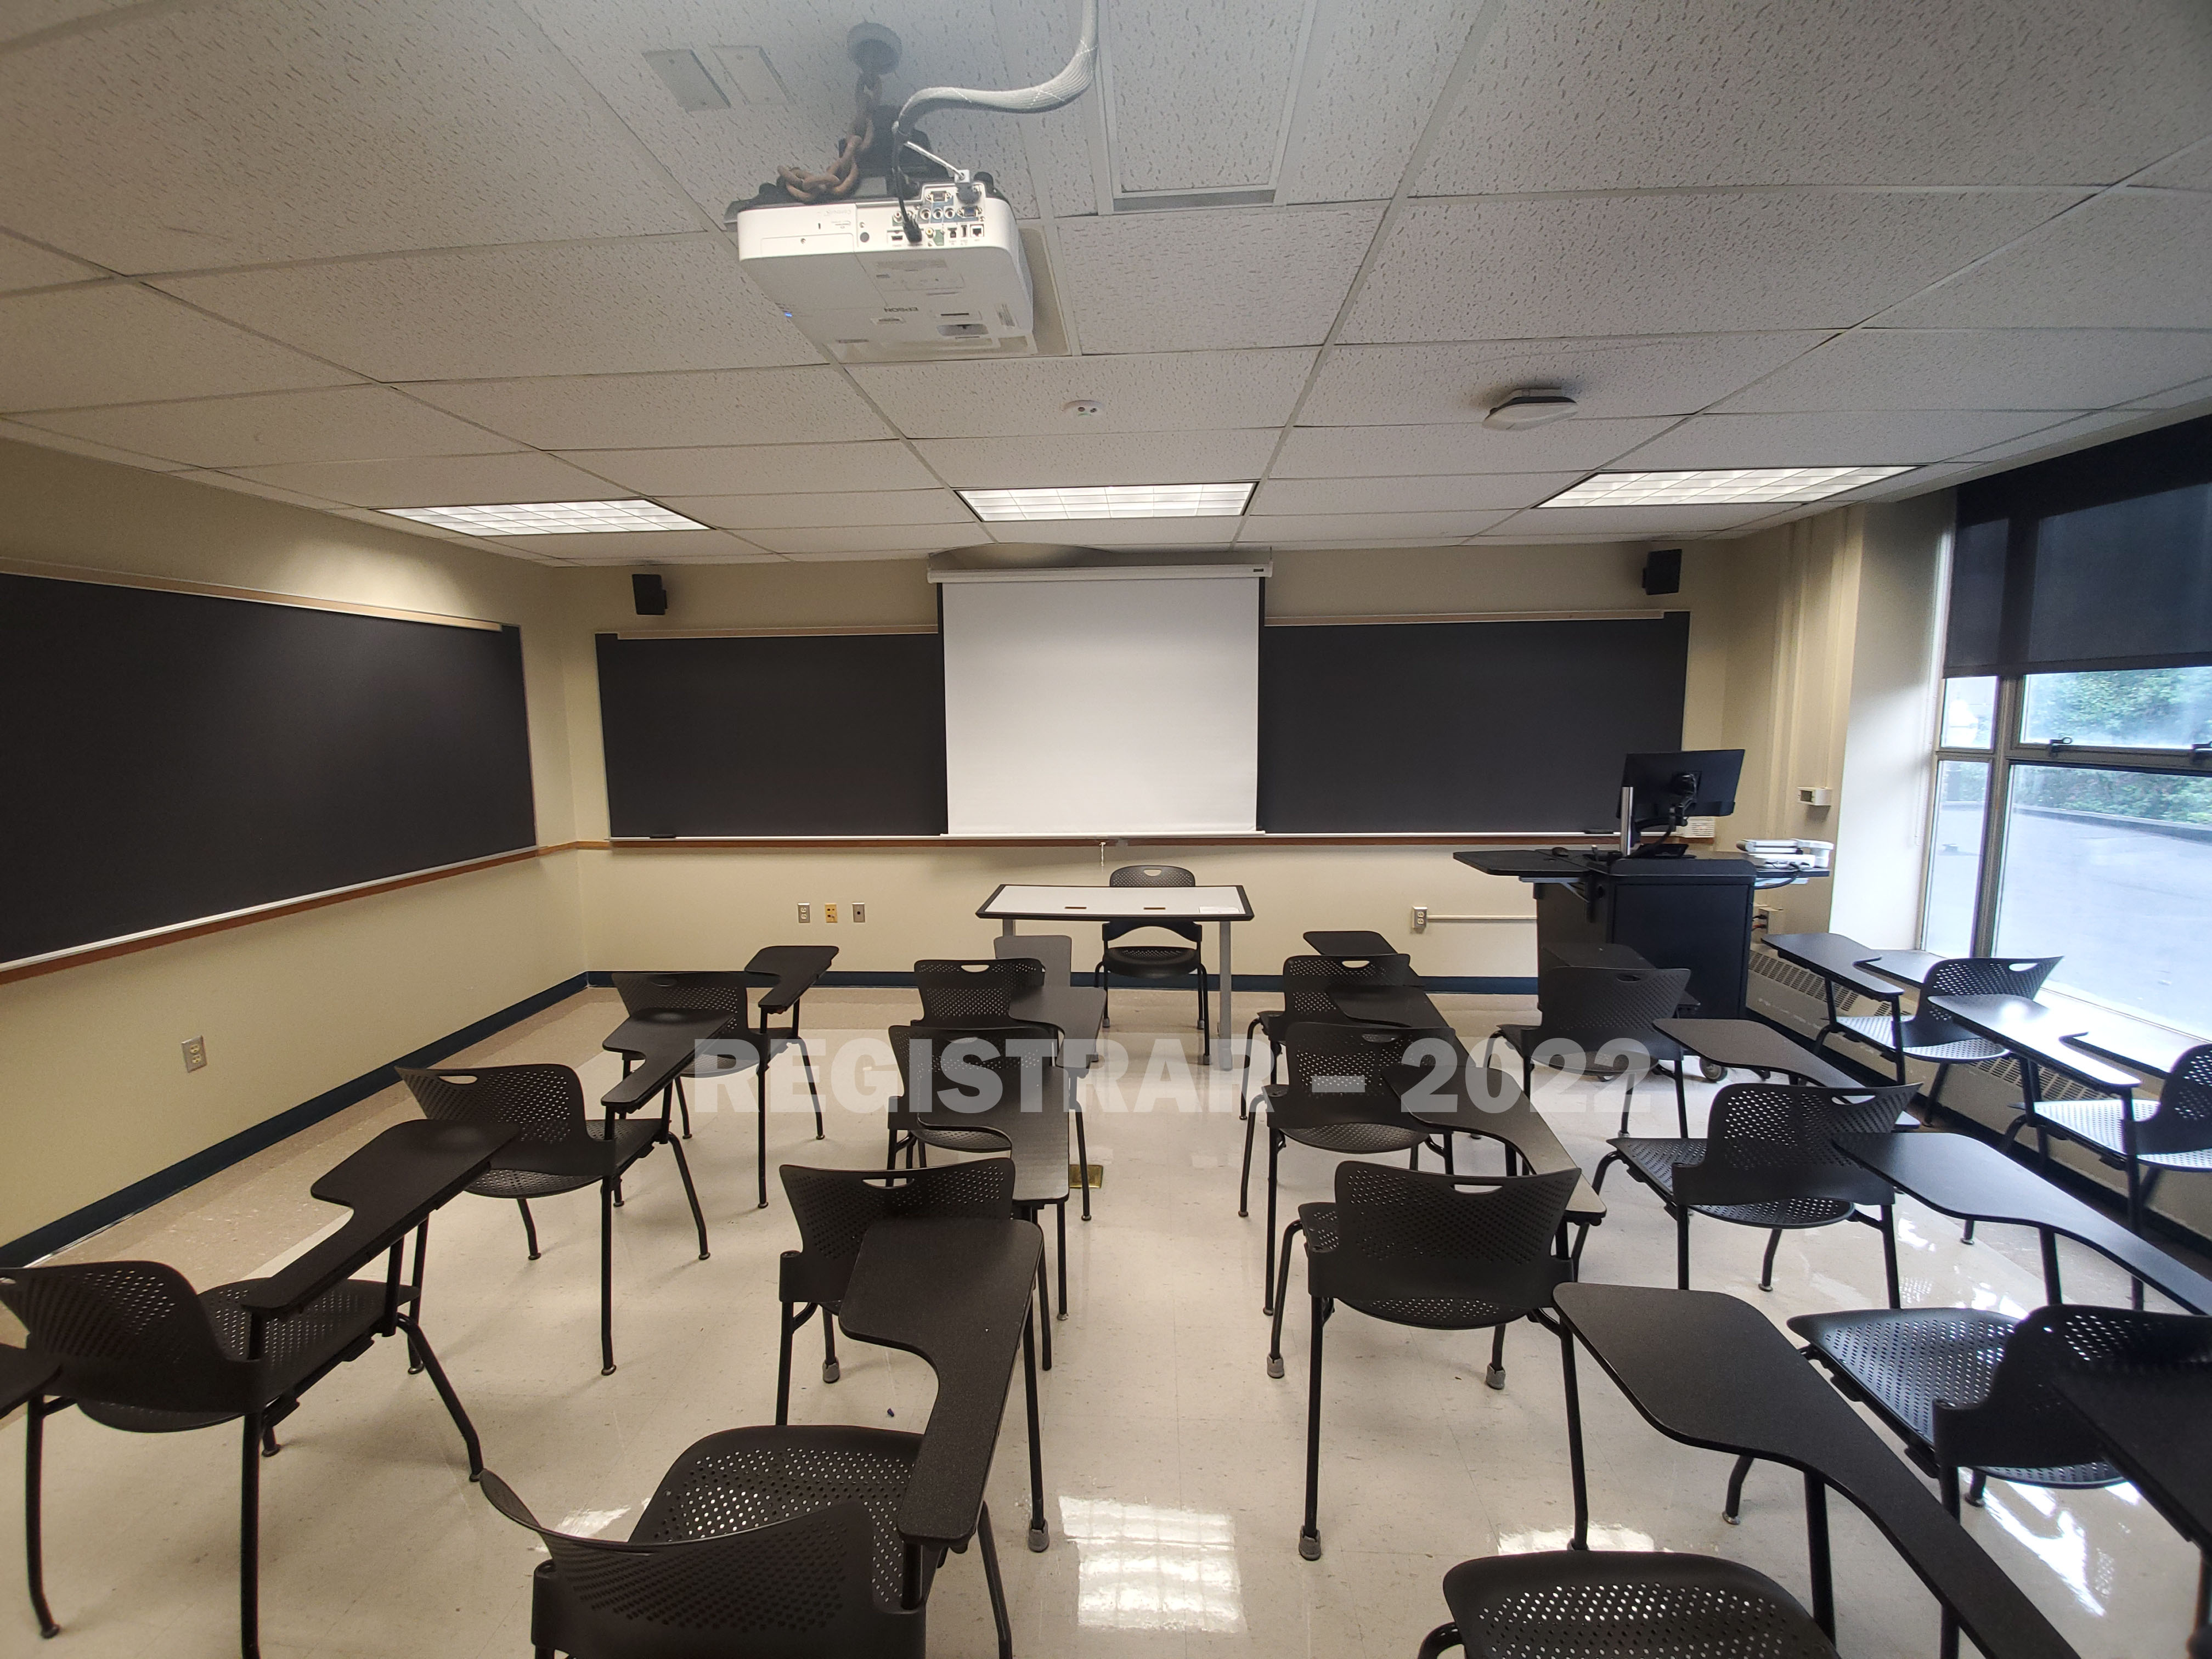 Enarson Classroom Building room 314 ultra wide angle view from the back of the room with projector screen down